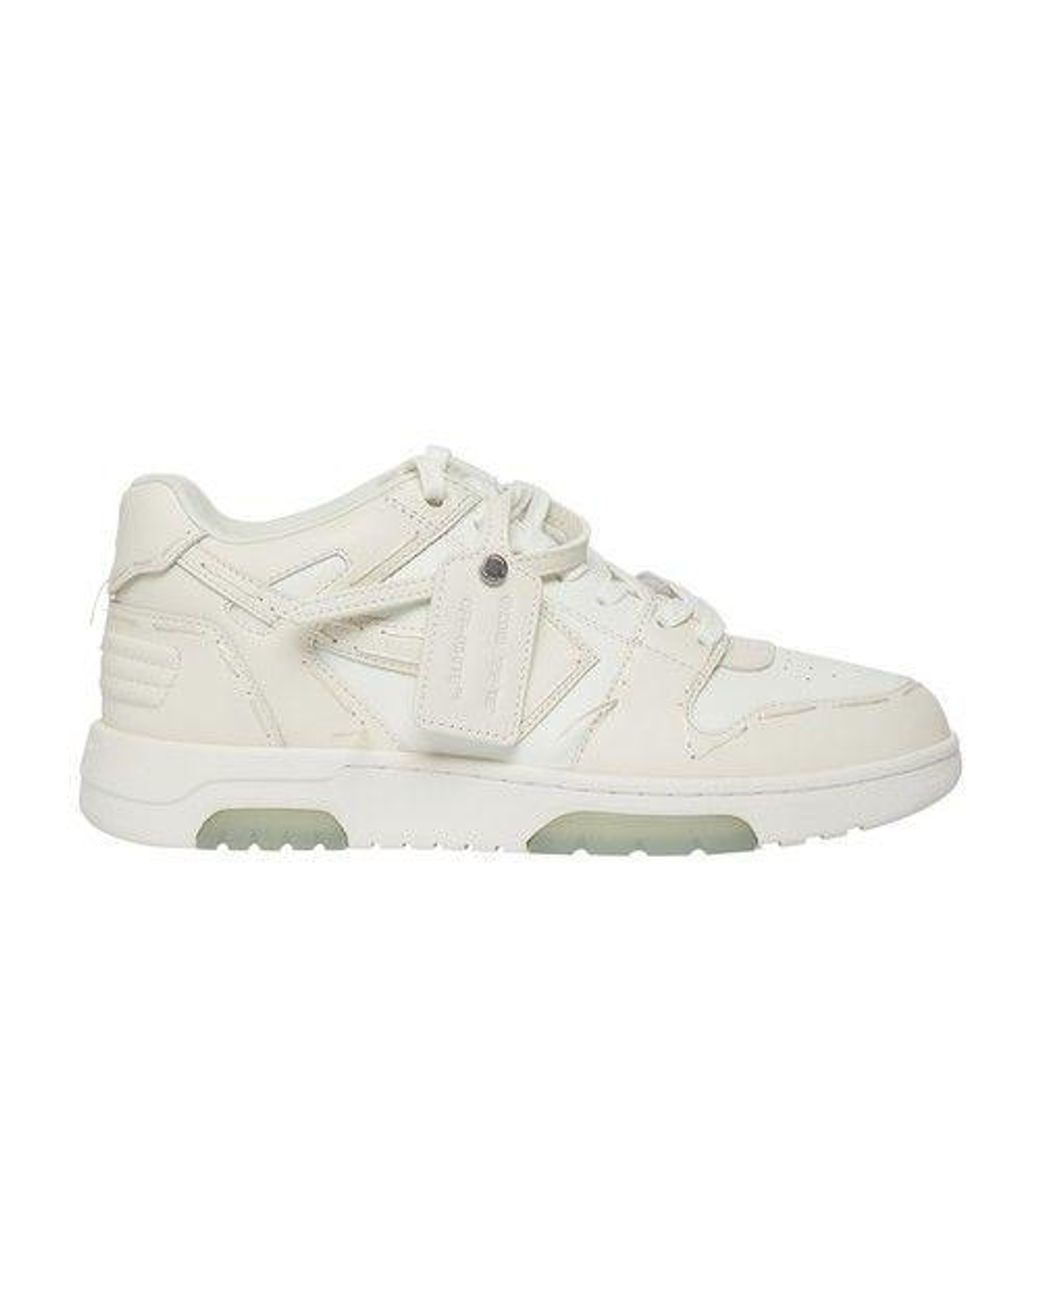 Off-White c/o Virgil Abloh Ooo Sartorial Stitching Low Top Sneakers in ...